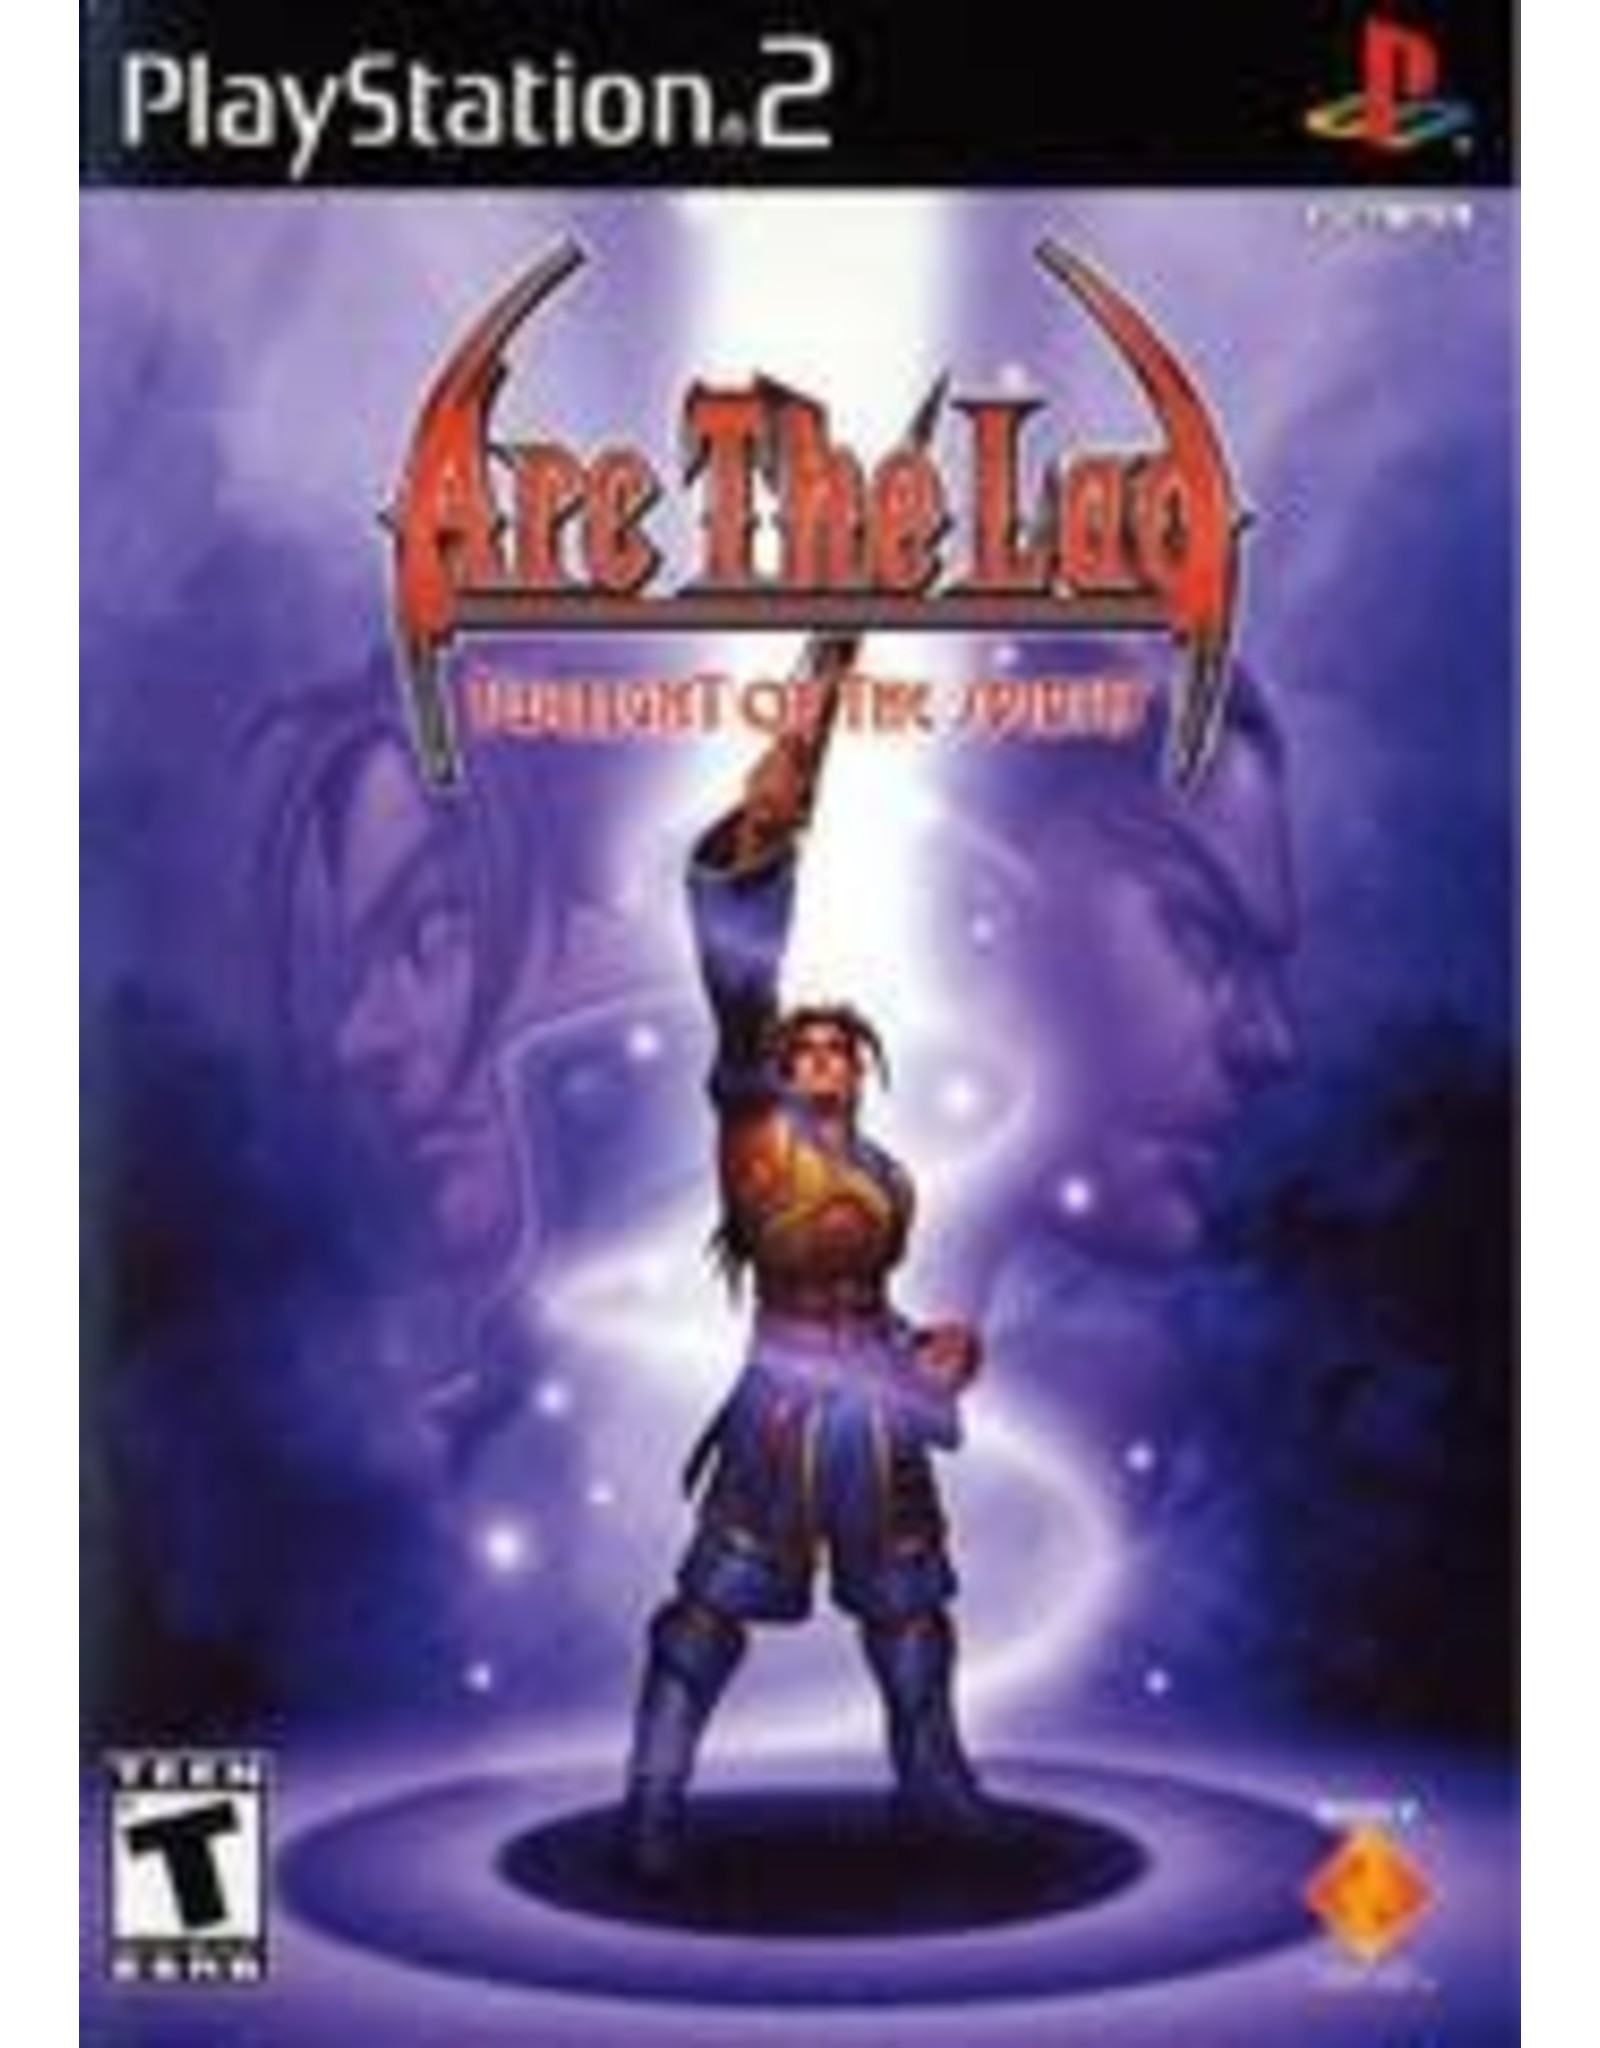 Playstation 2 Arc the Lad Twilight of the Spirits (Used)